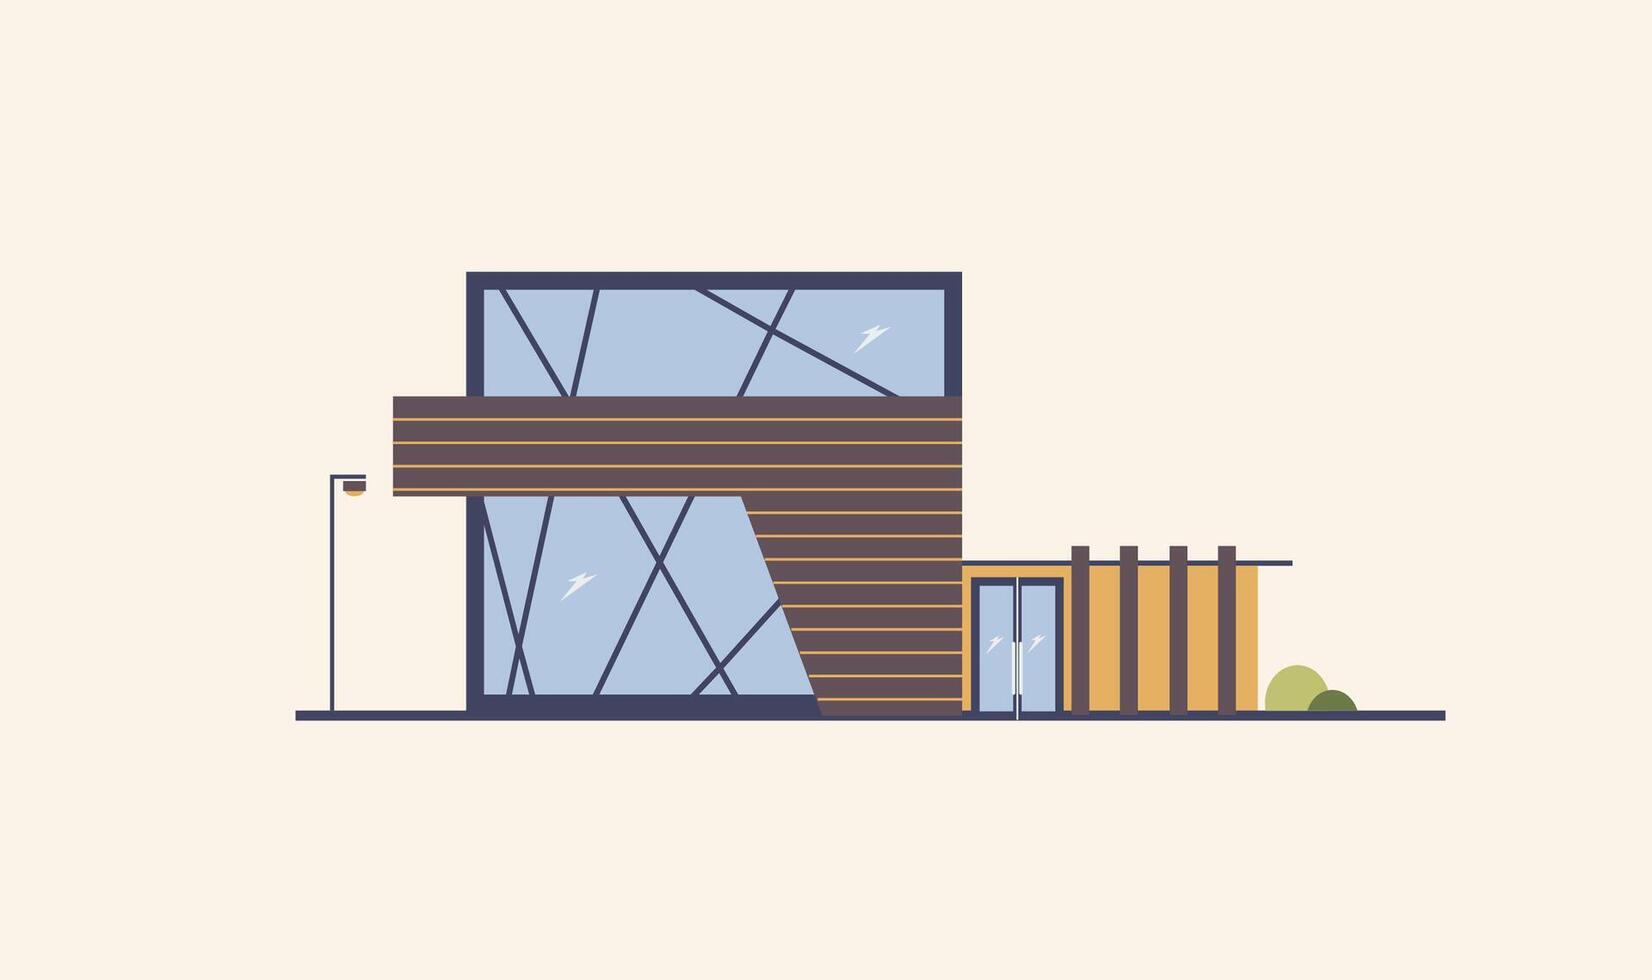 Modern building with large windows, glass door and wooden facade. House built using natural materials. Sustainable urbanism, architecture and ecological design. Vector illustration in flat style.